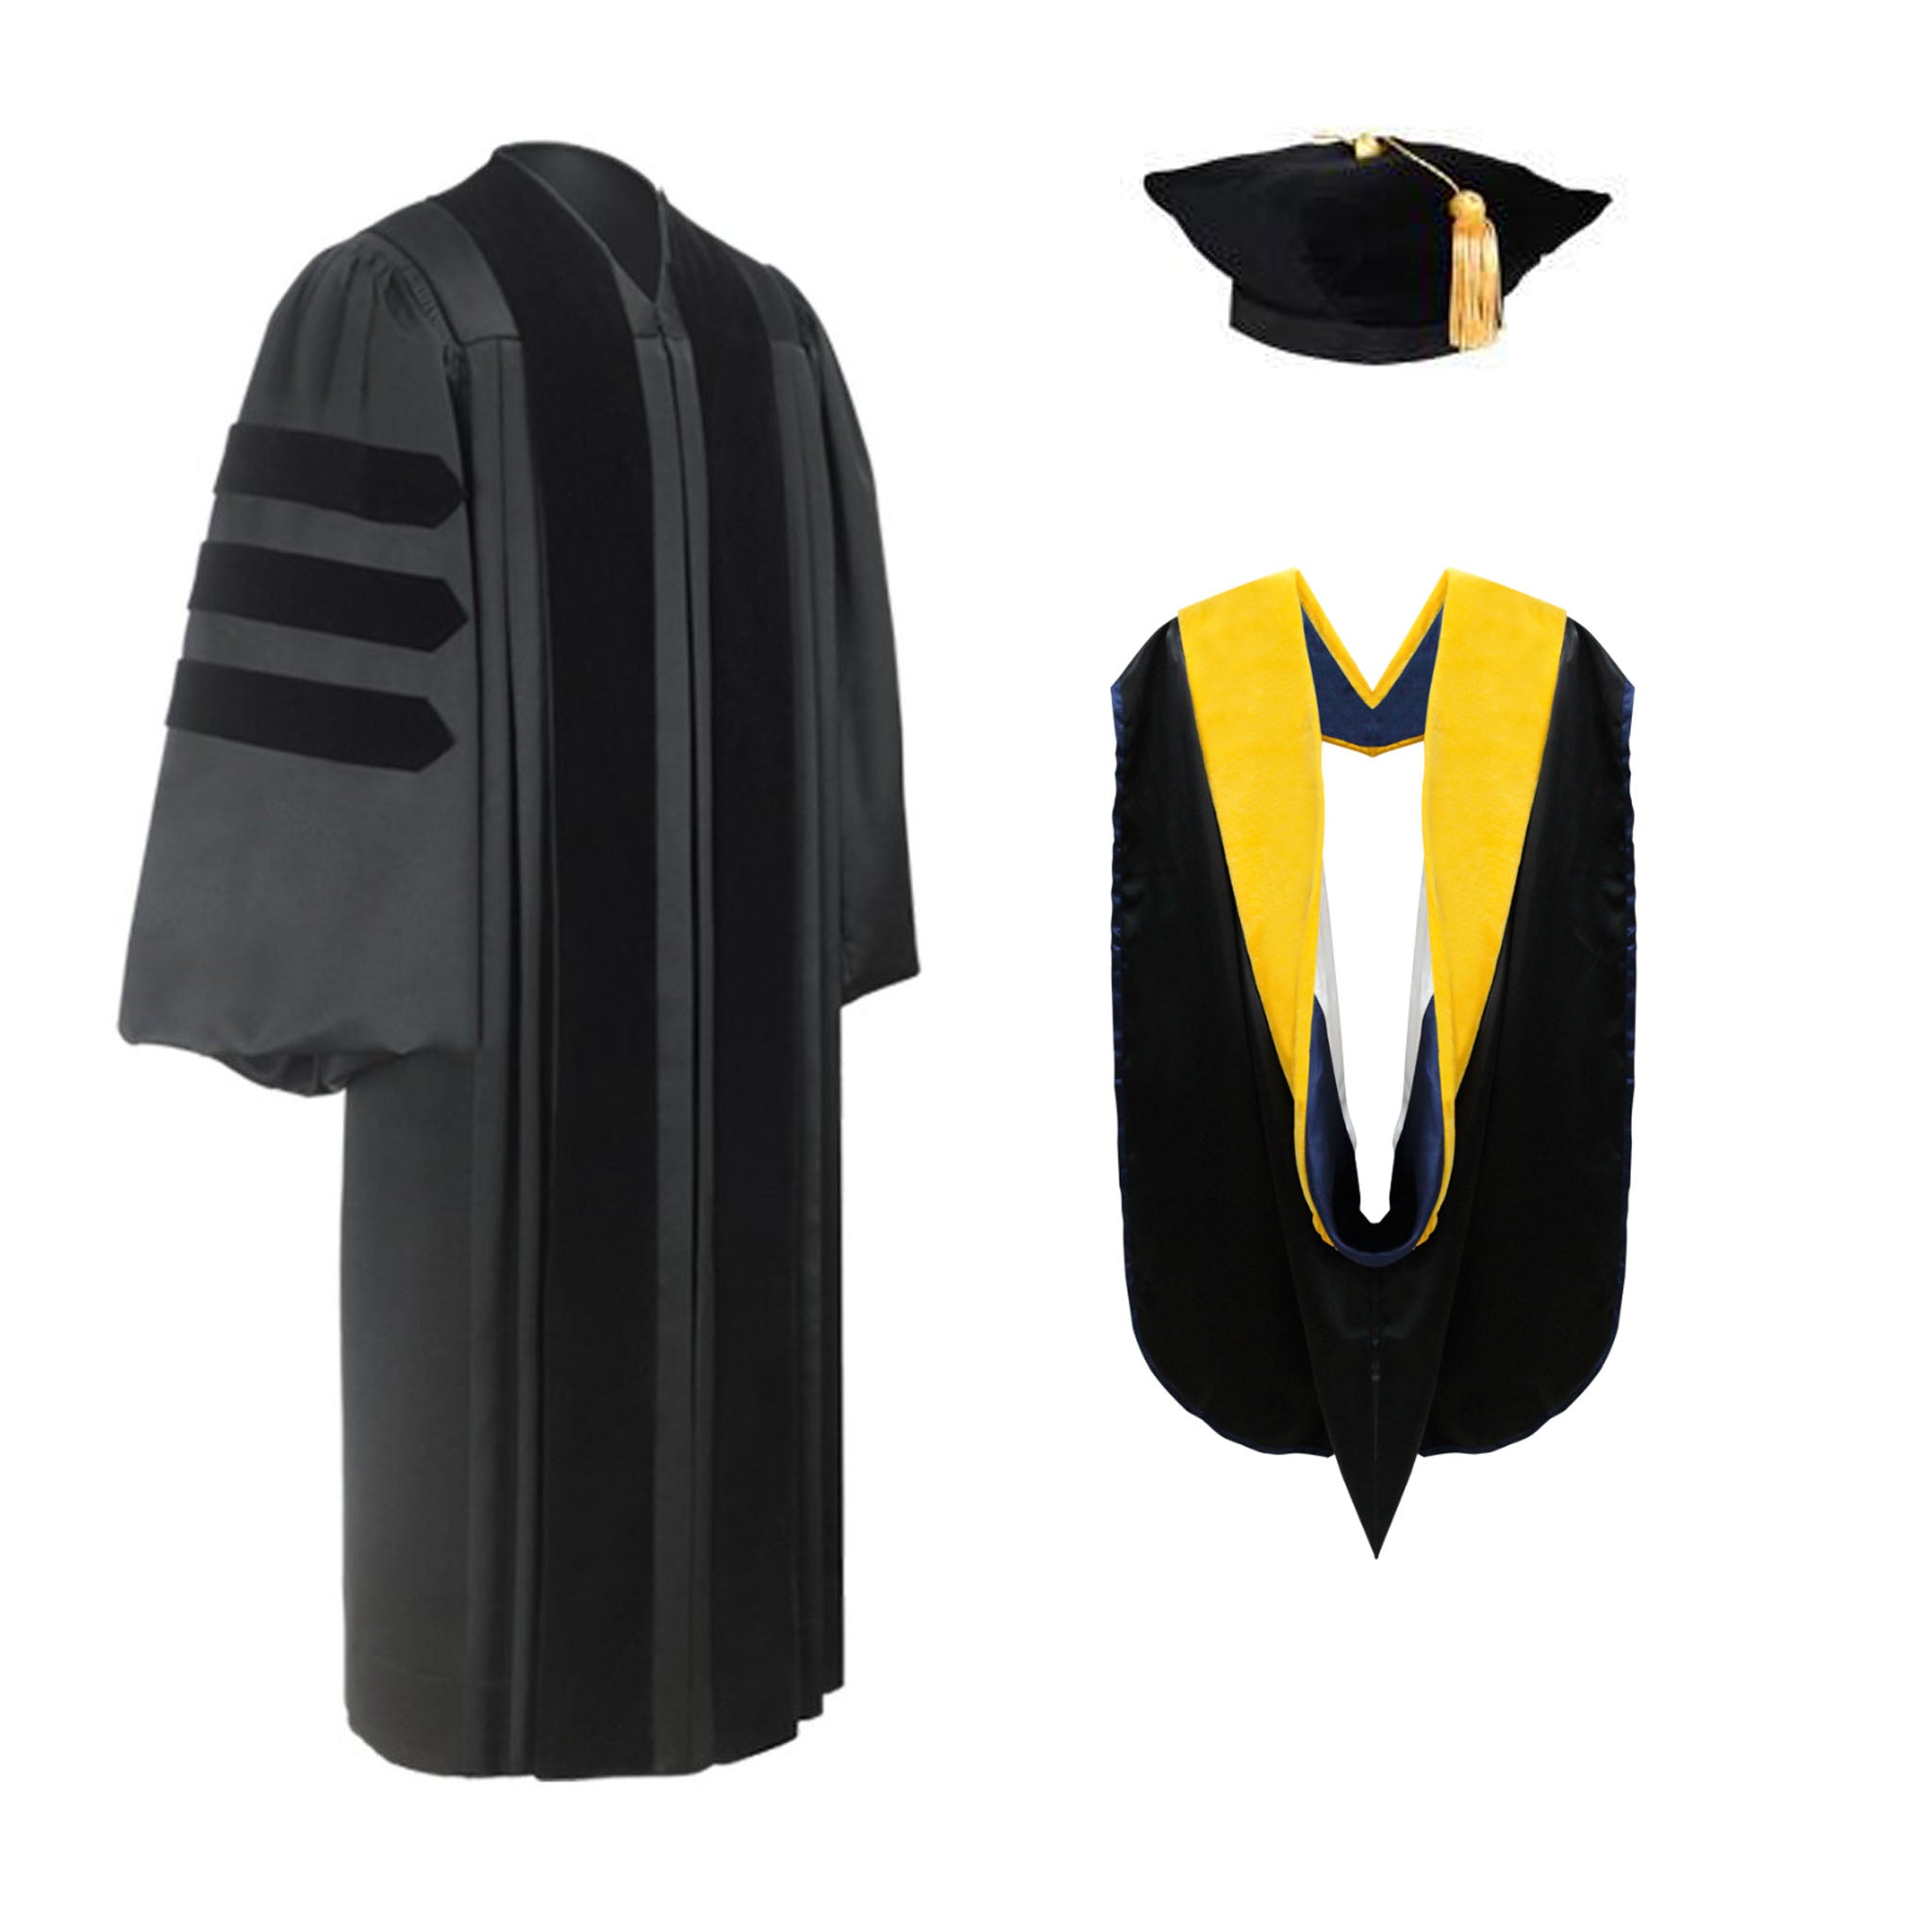 Bachelors Gown and Mortarboard Set (Purchase) – Churchill Gowns